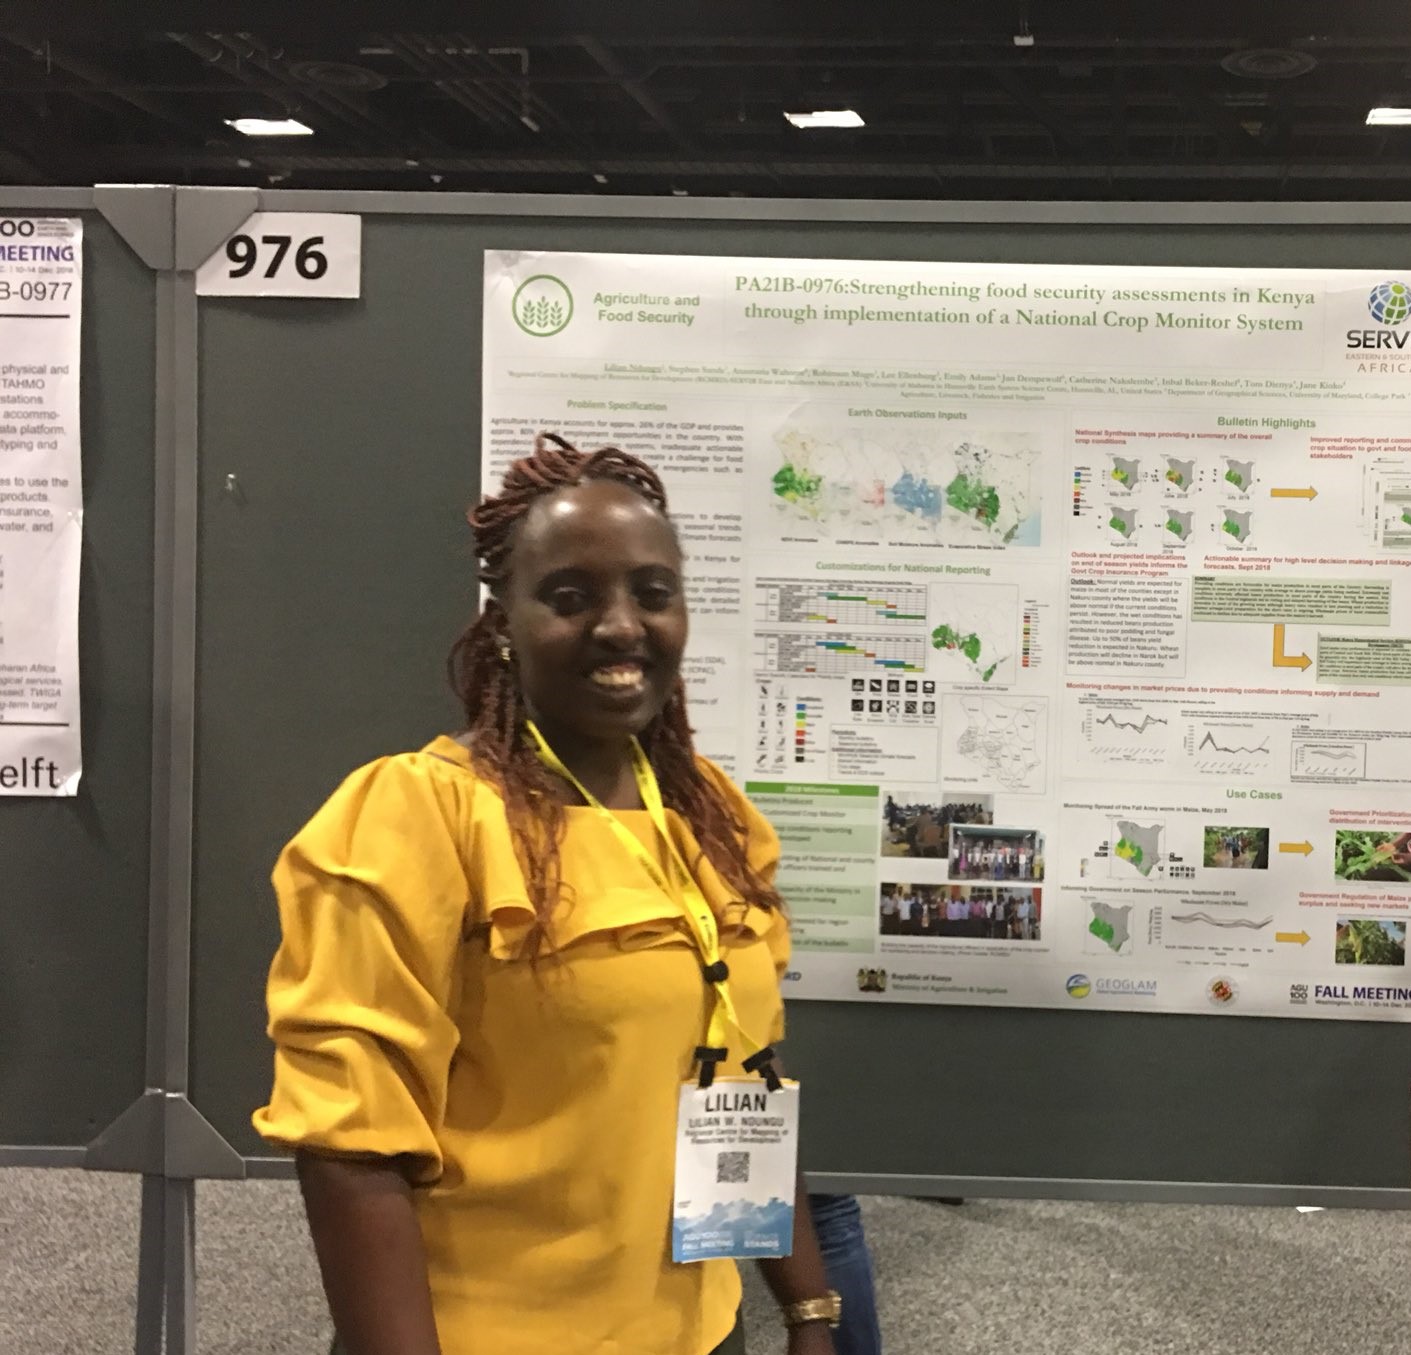 Lilian Ndungu, Agriculture and Food Security Lead for SERVIR’s Eastern and Southern Africa hub, attends the 2018 AGU meeting poster session to discuss food security. 